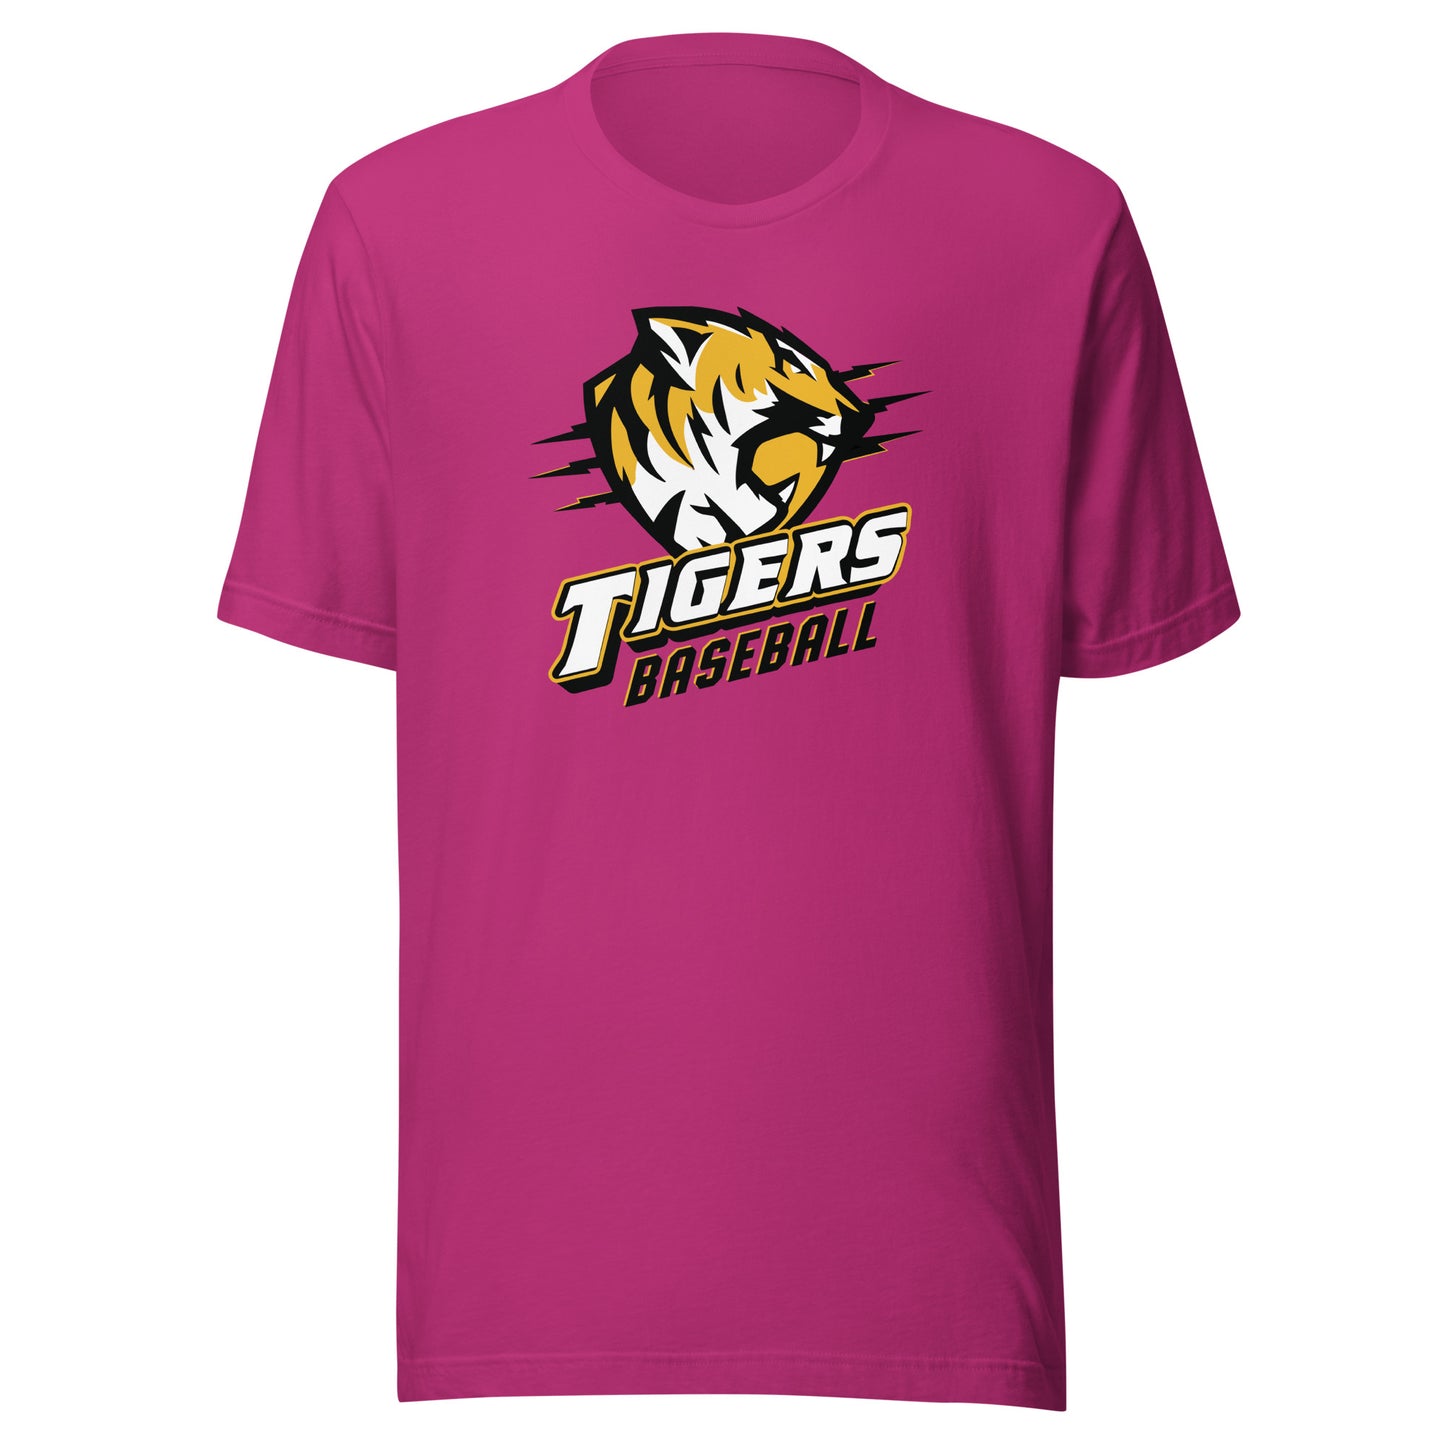 Tigers Baseball Bella Canvas Jersey Tee in Berry